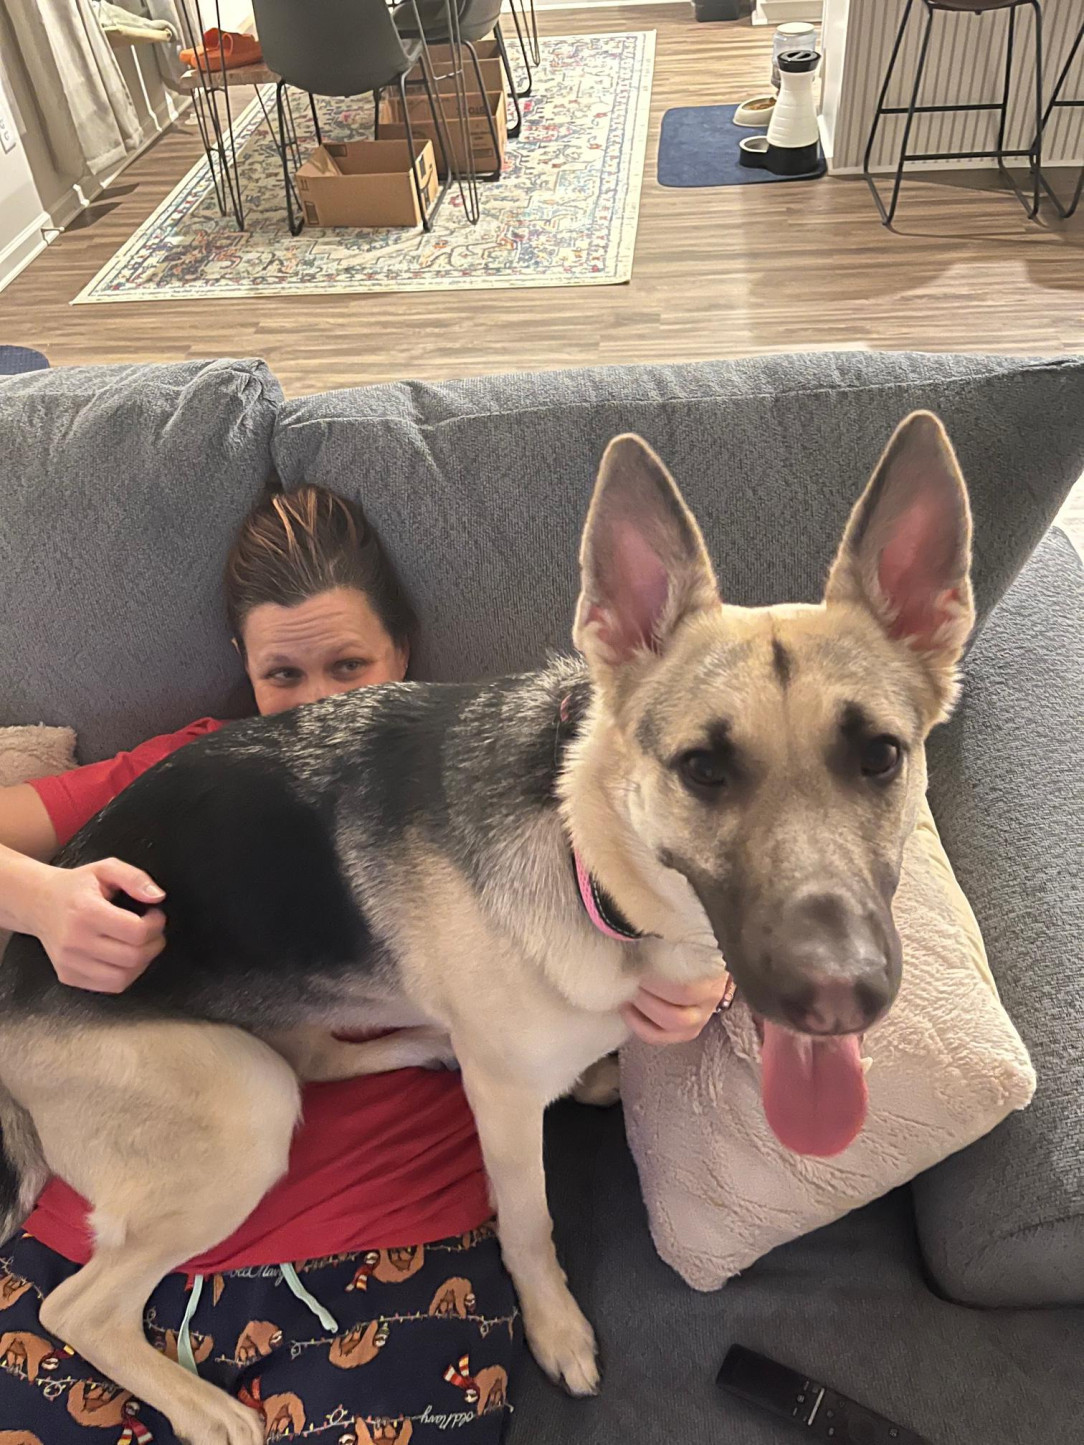 You try telling her that 80lb dogs aren&#039;t lap dogs. She was raised with cats, so &quot;if I fits, I sits&quot;